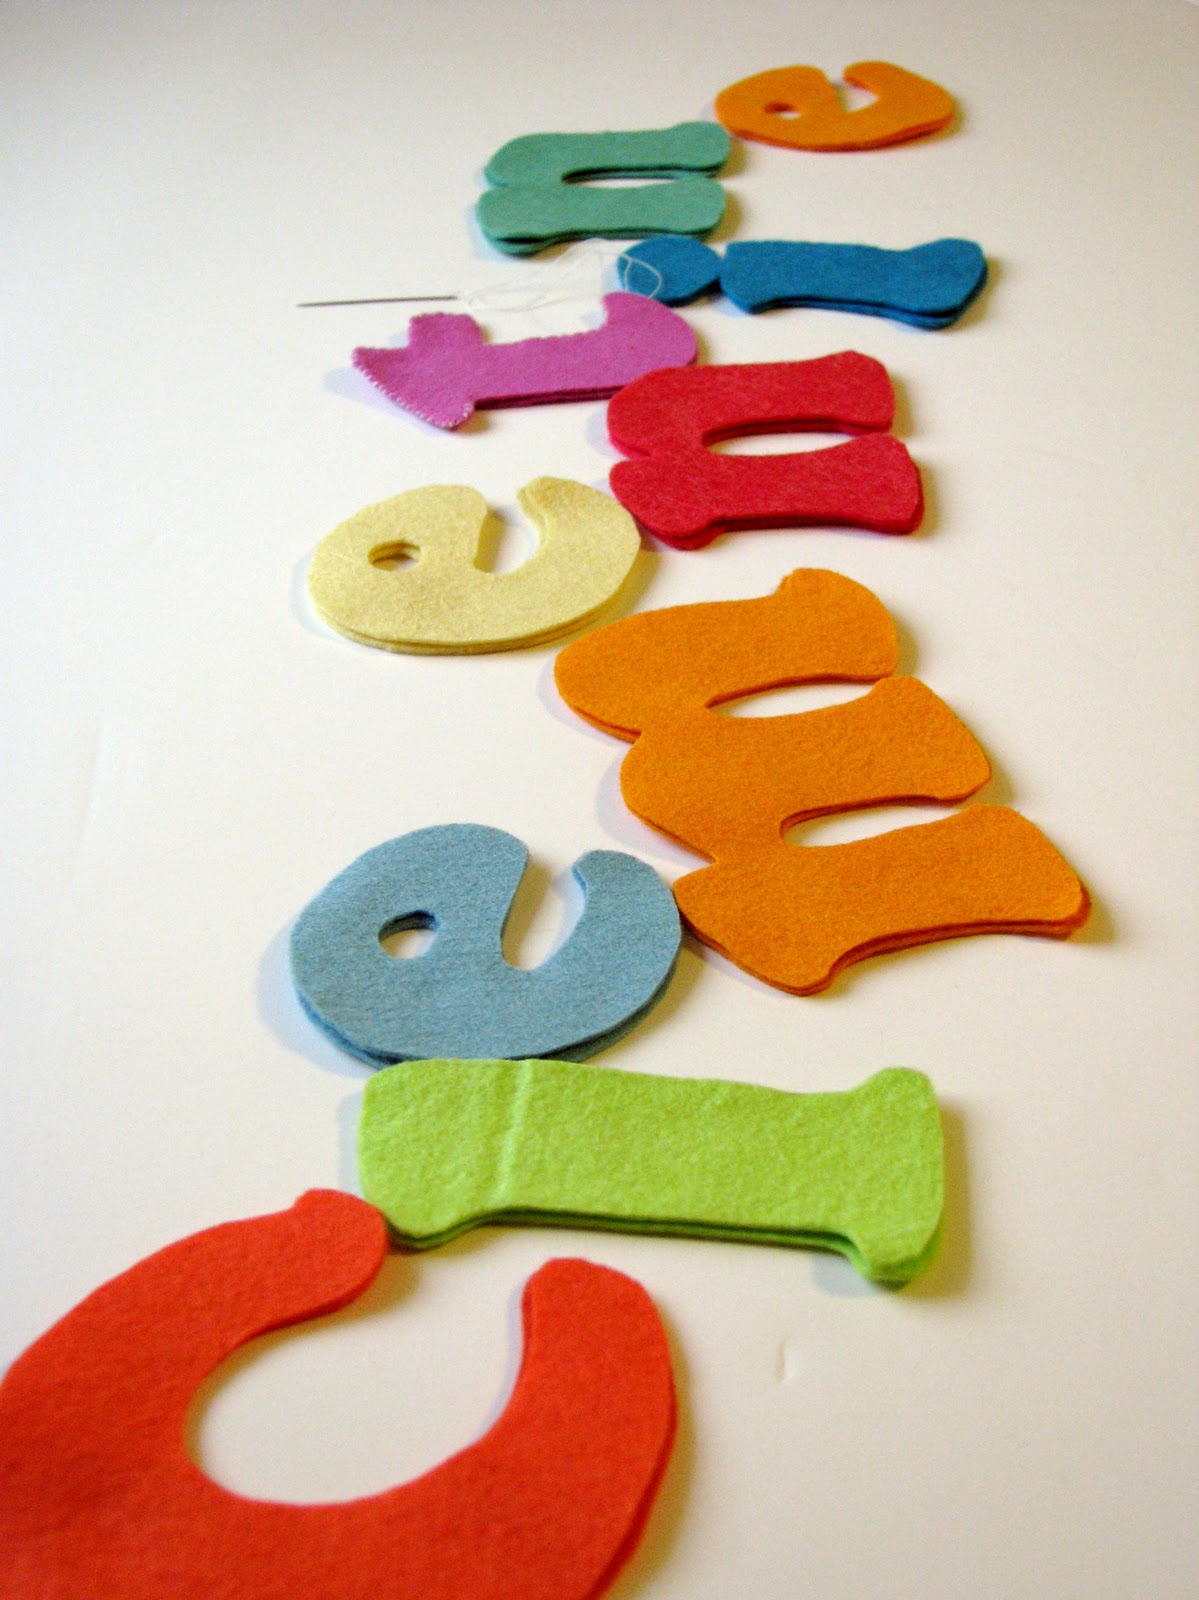 How To Make Cute Puffy Felt Letters - DIY Crafts Tutorial - Guidecentral 